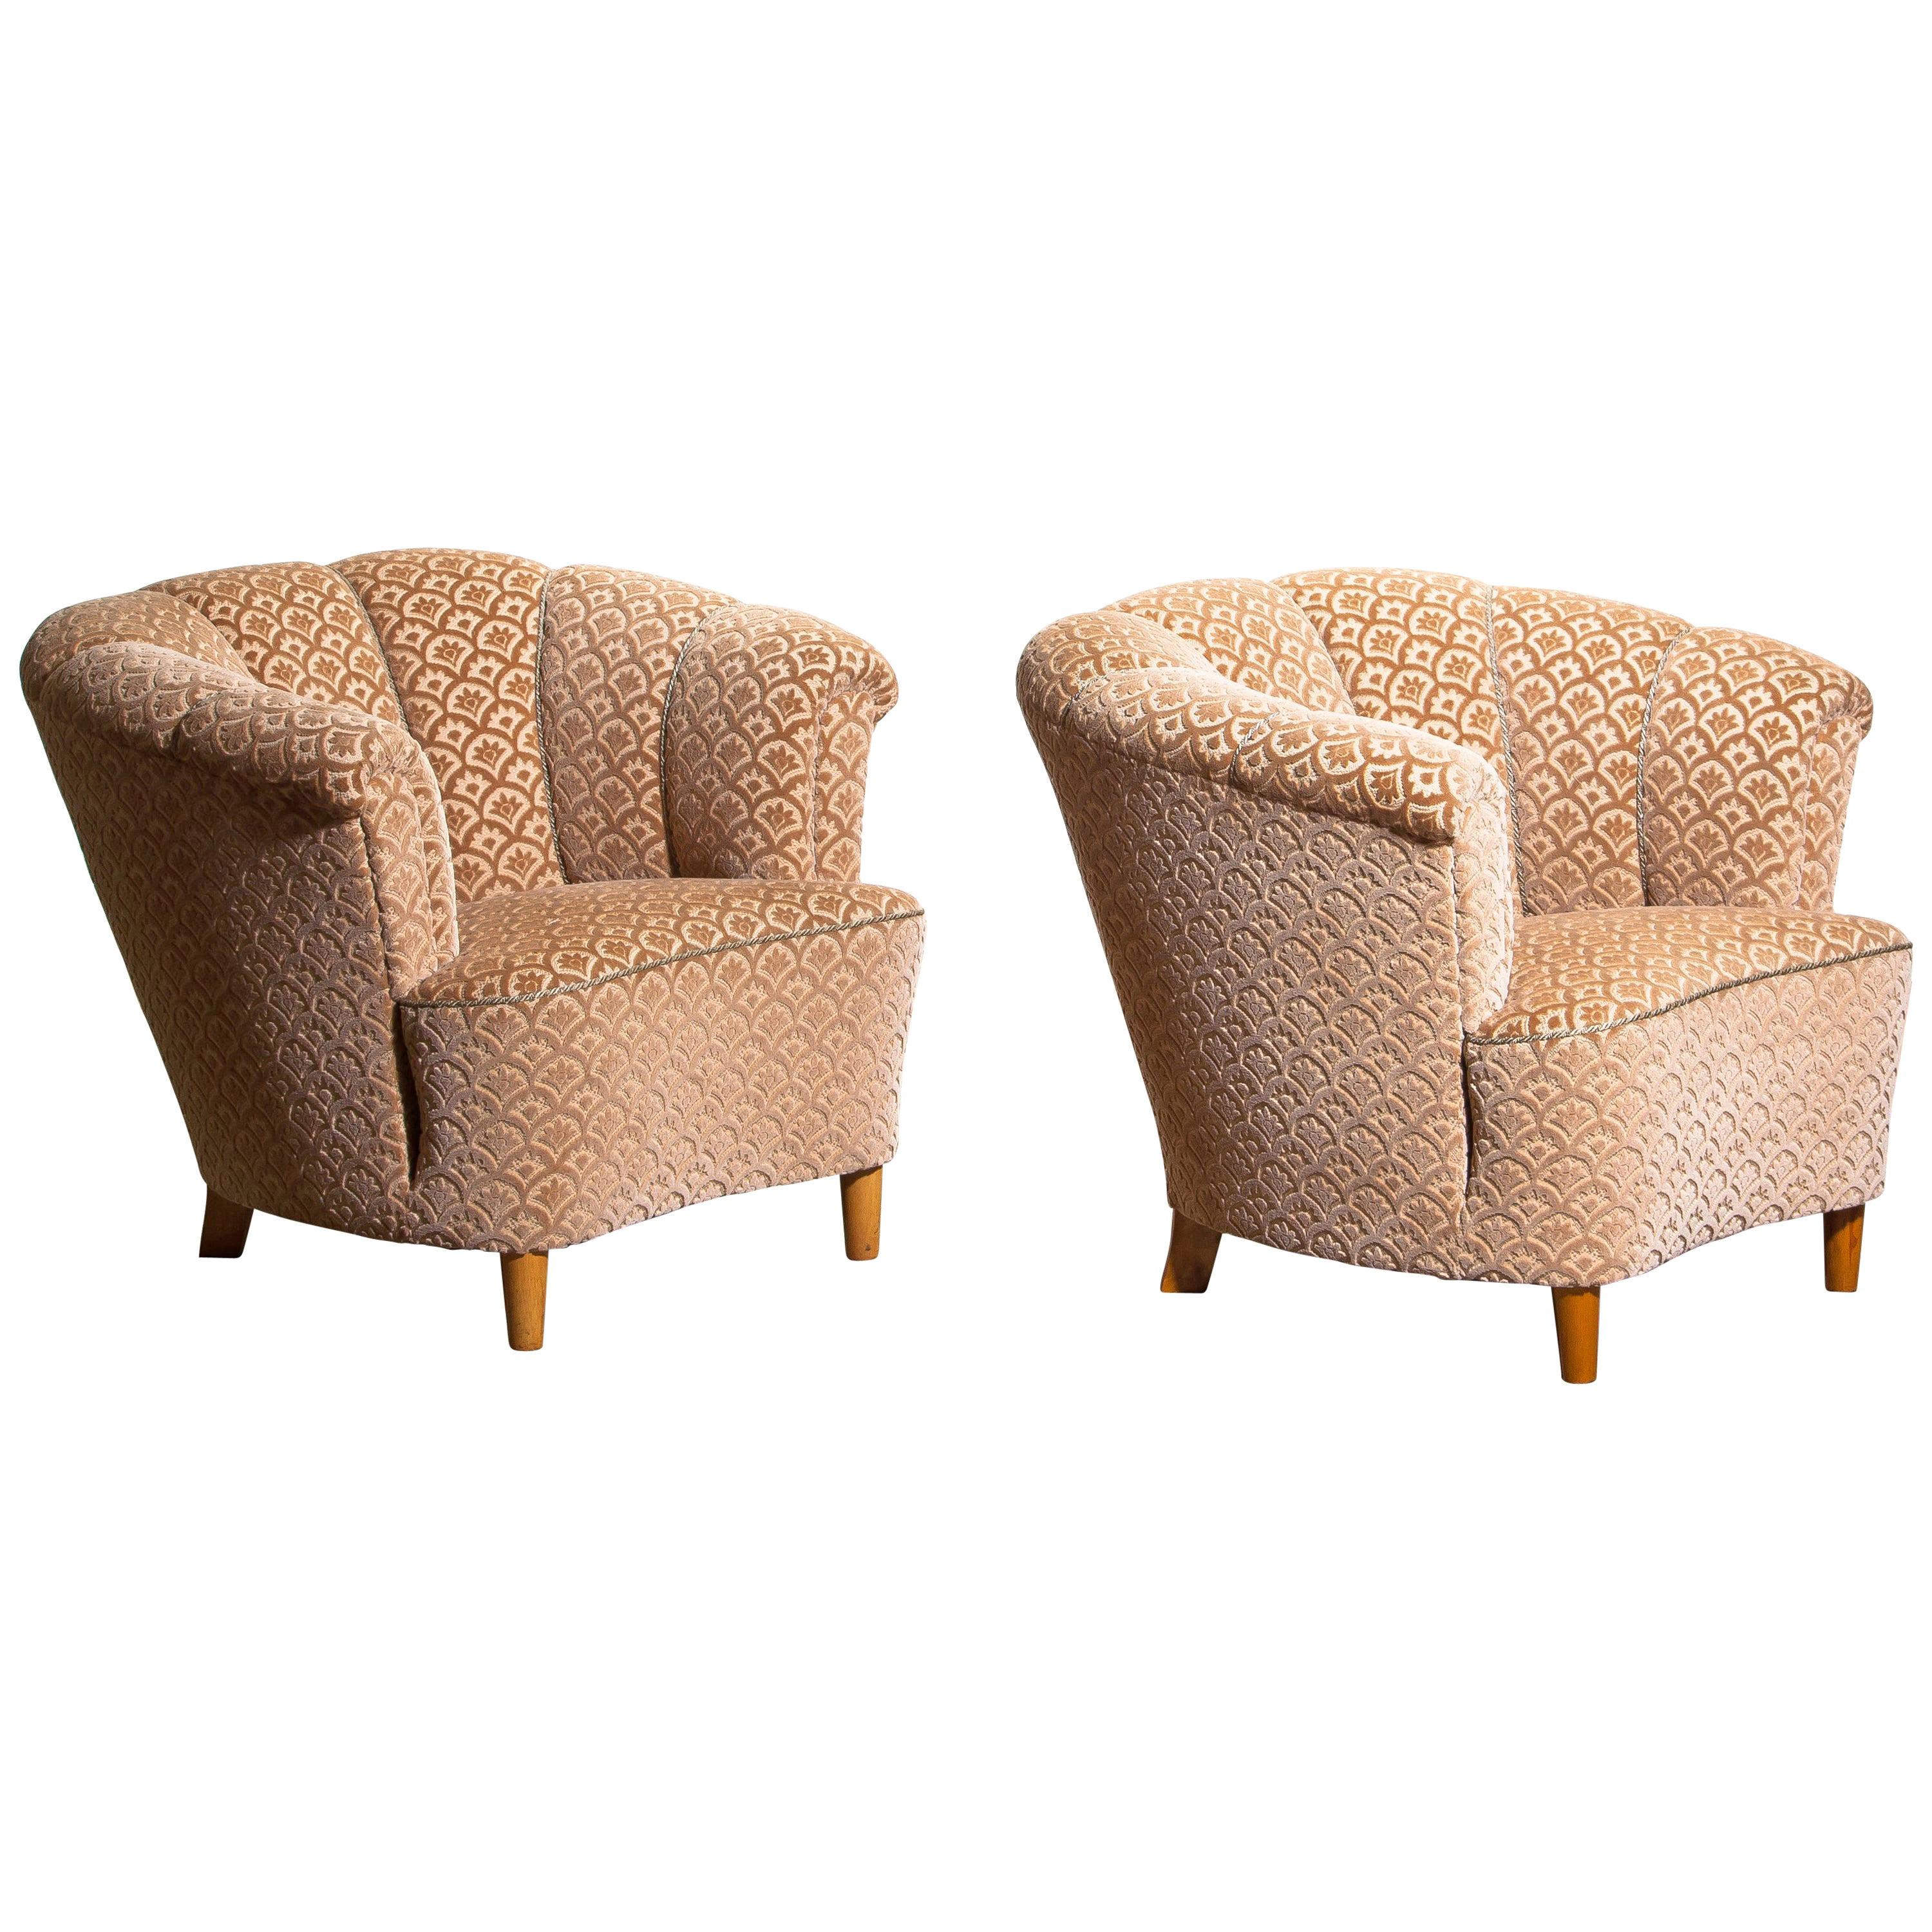 Beautiful set of two comfortable club lounge cocktail chairs from the 1940s.
Both chairs are in original and excellent condition.
The chairs are richly upholstered in flocked velvet and standing on beech legs.
 